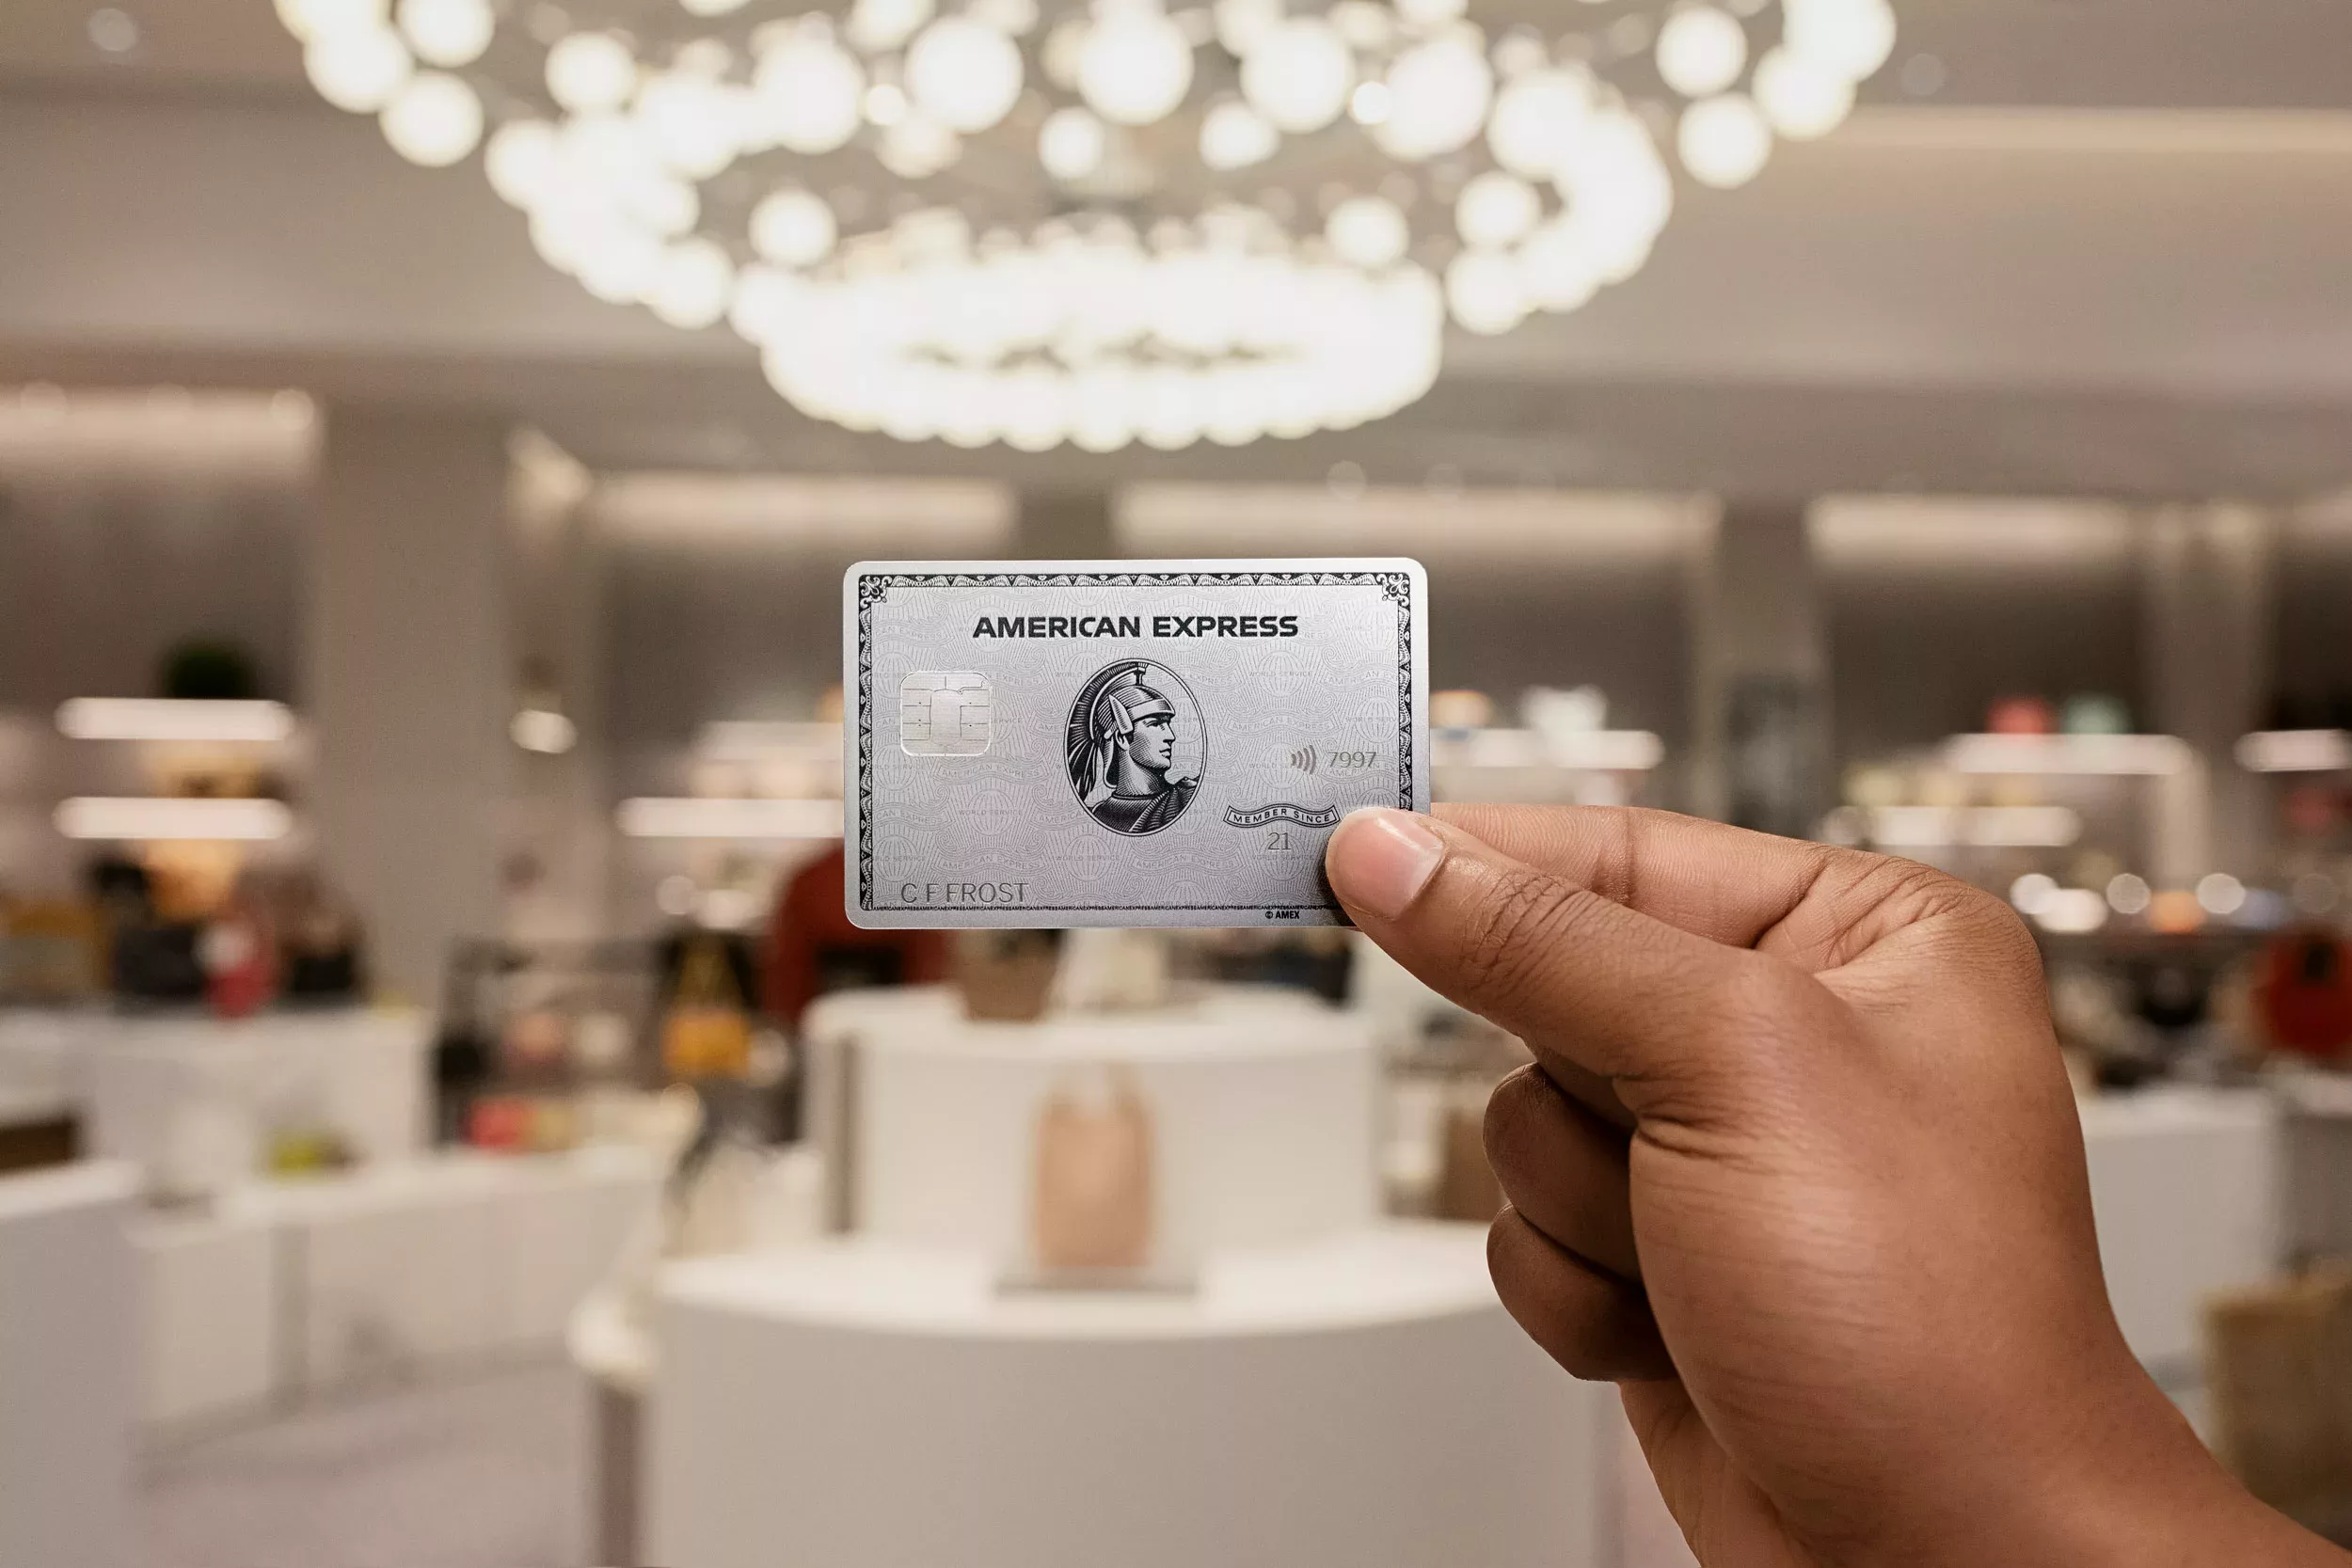 The Amex Cell Phone Protection Benefit is included in the Platinum Card